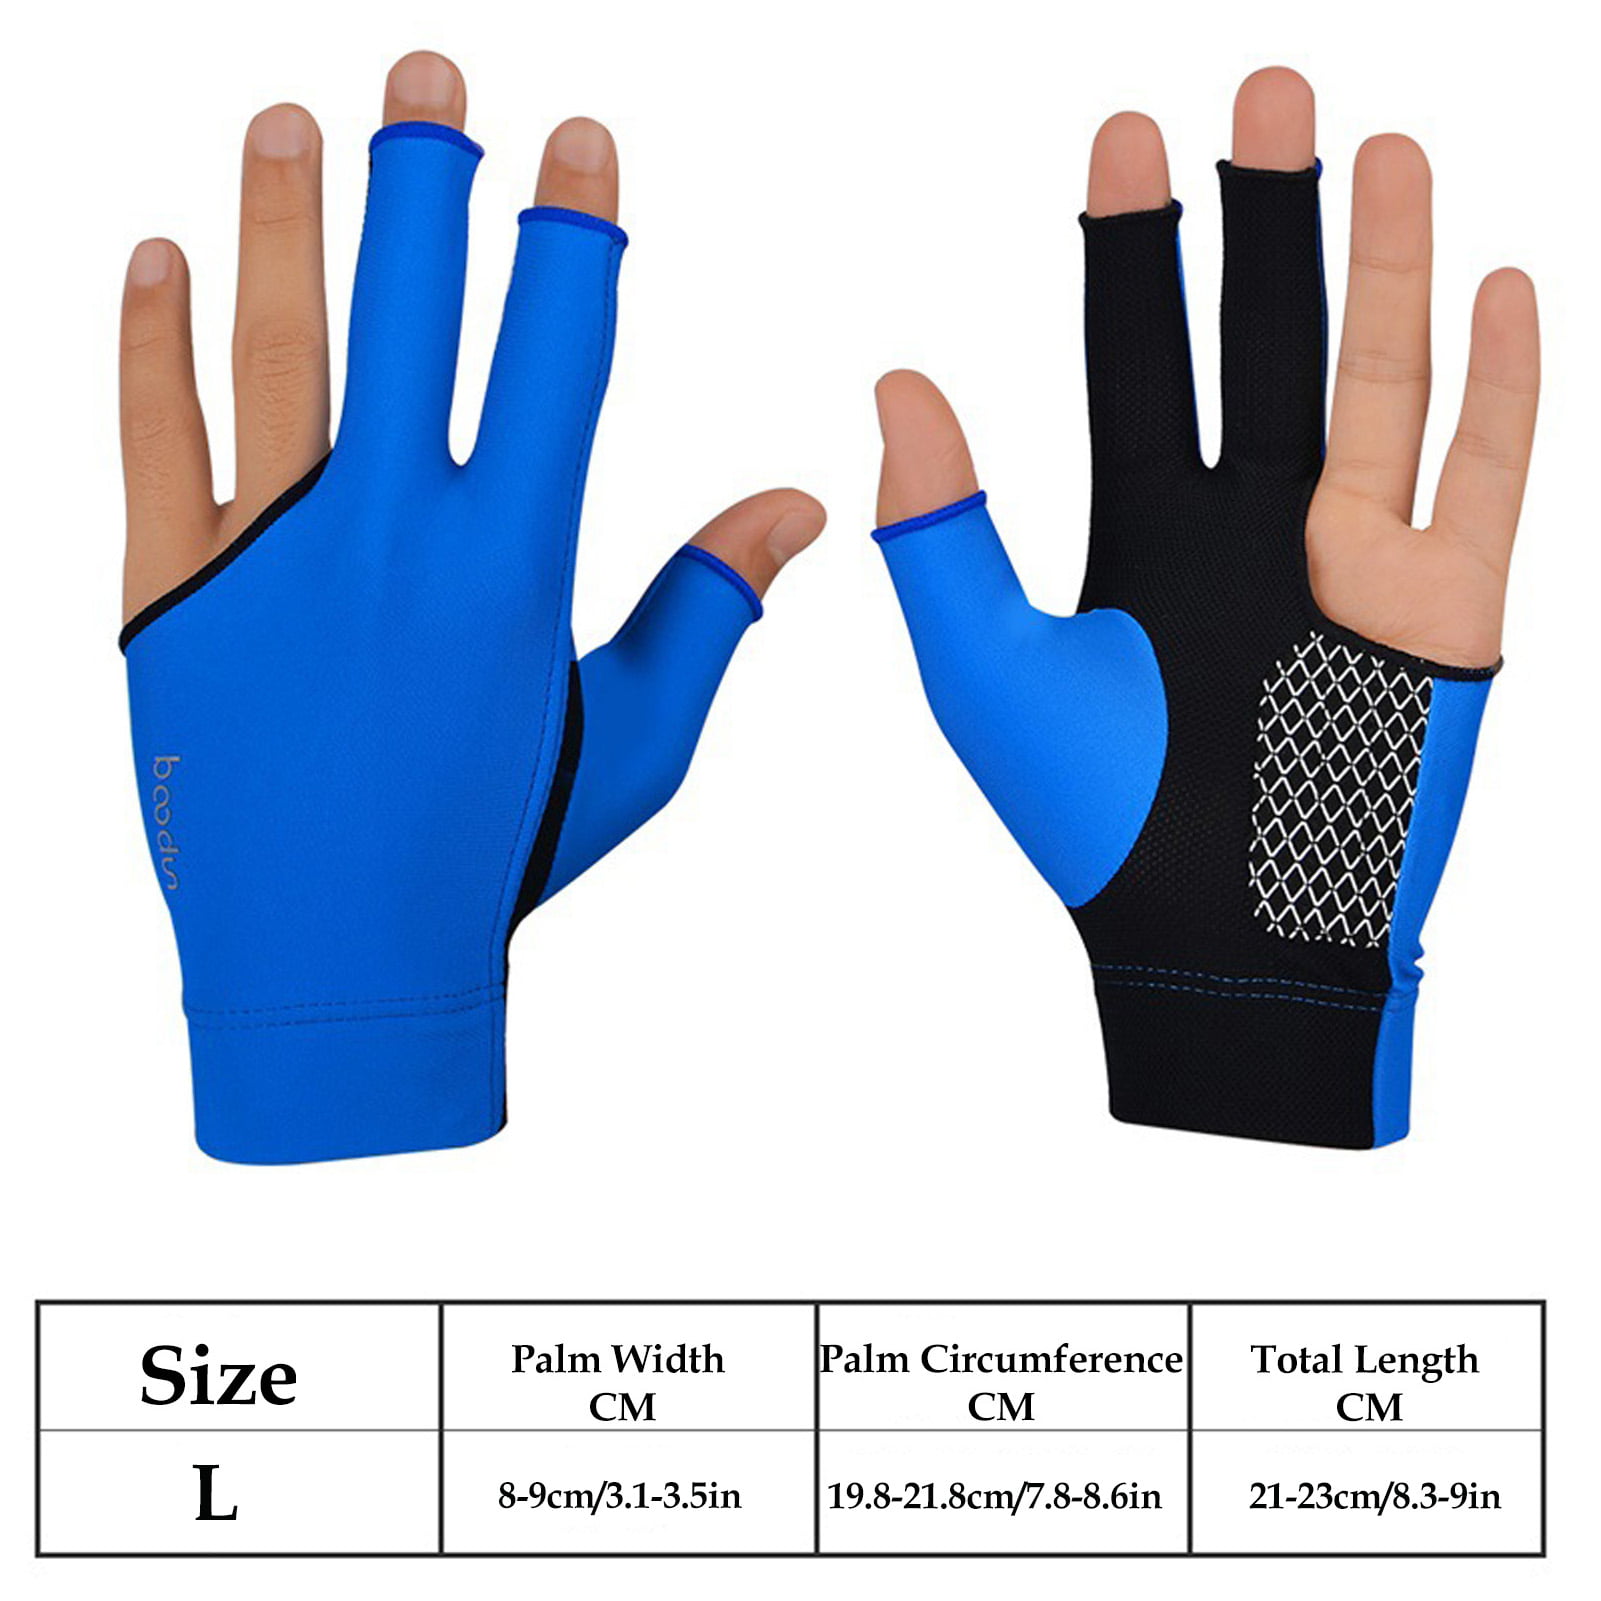 2 Gloves Per Package Fits Either Hand Billiard Gloves,Stretchable Pool Cue Snooker Glove 